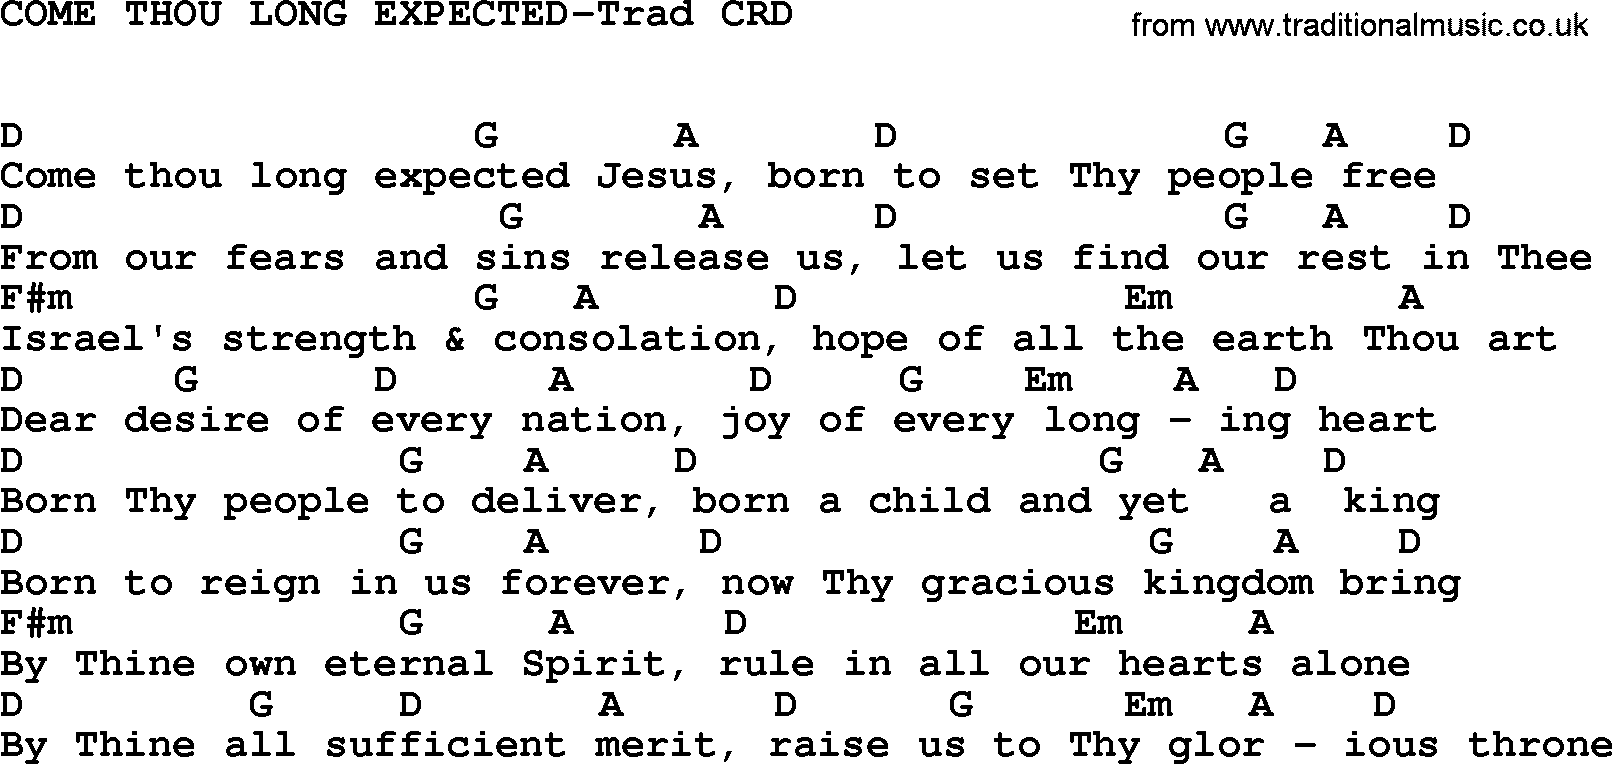 Gospel Song: Come Thou Long Expected-Trad, lyrics and chords.